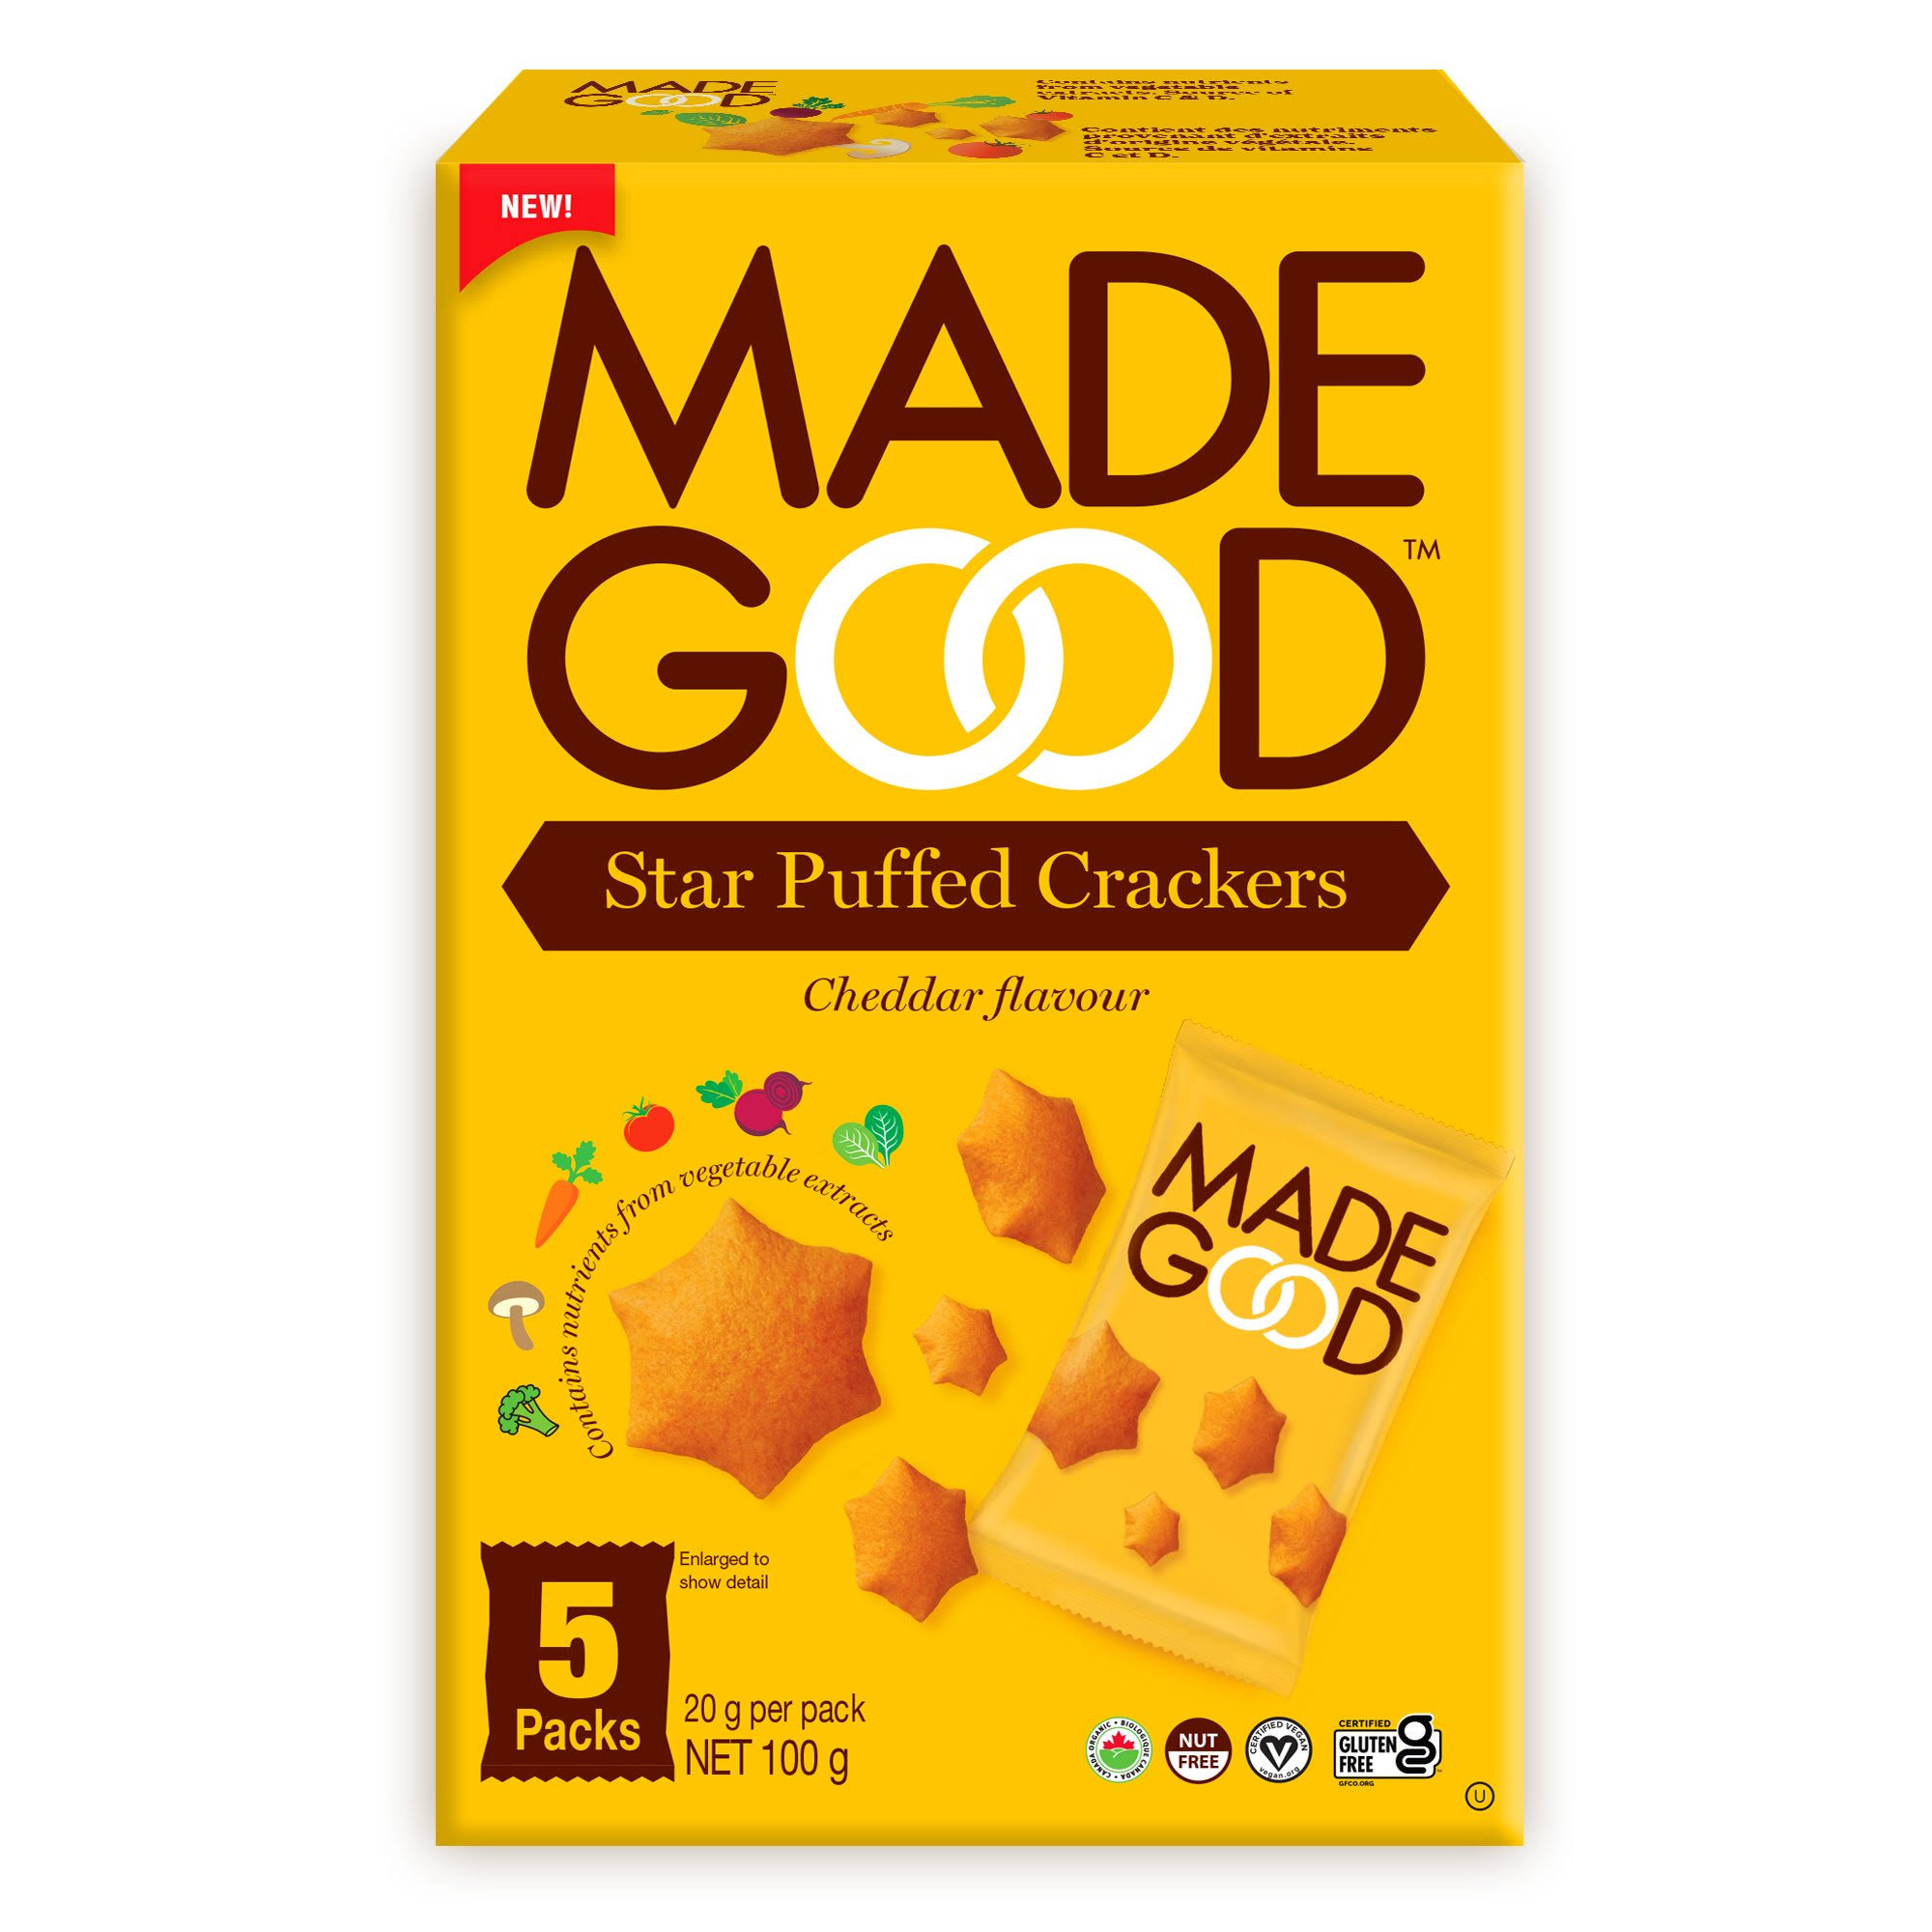 MadeGood Cheddar Flavour Star Puffed Crackers - 5 ct